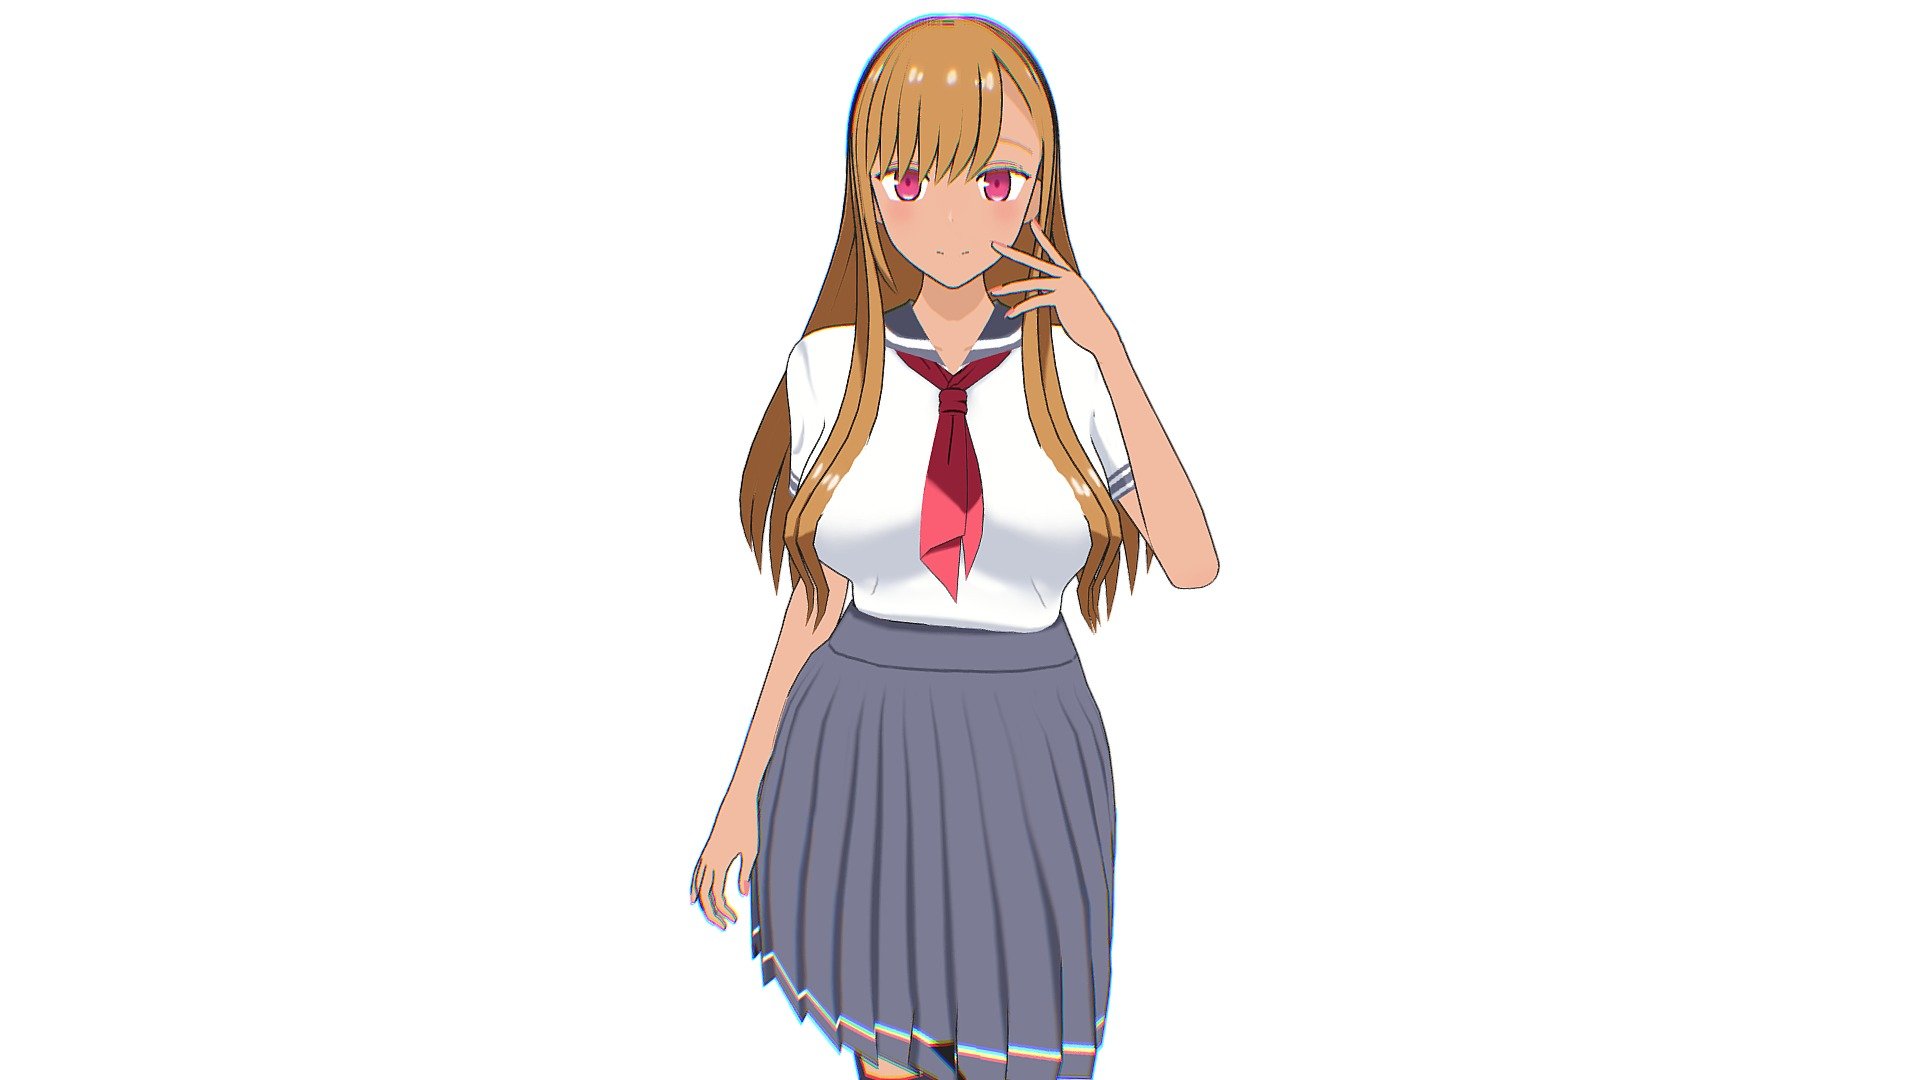 &ldquo;Confident anime schoolgirl, wearing a stylish school uniform and a determined look.